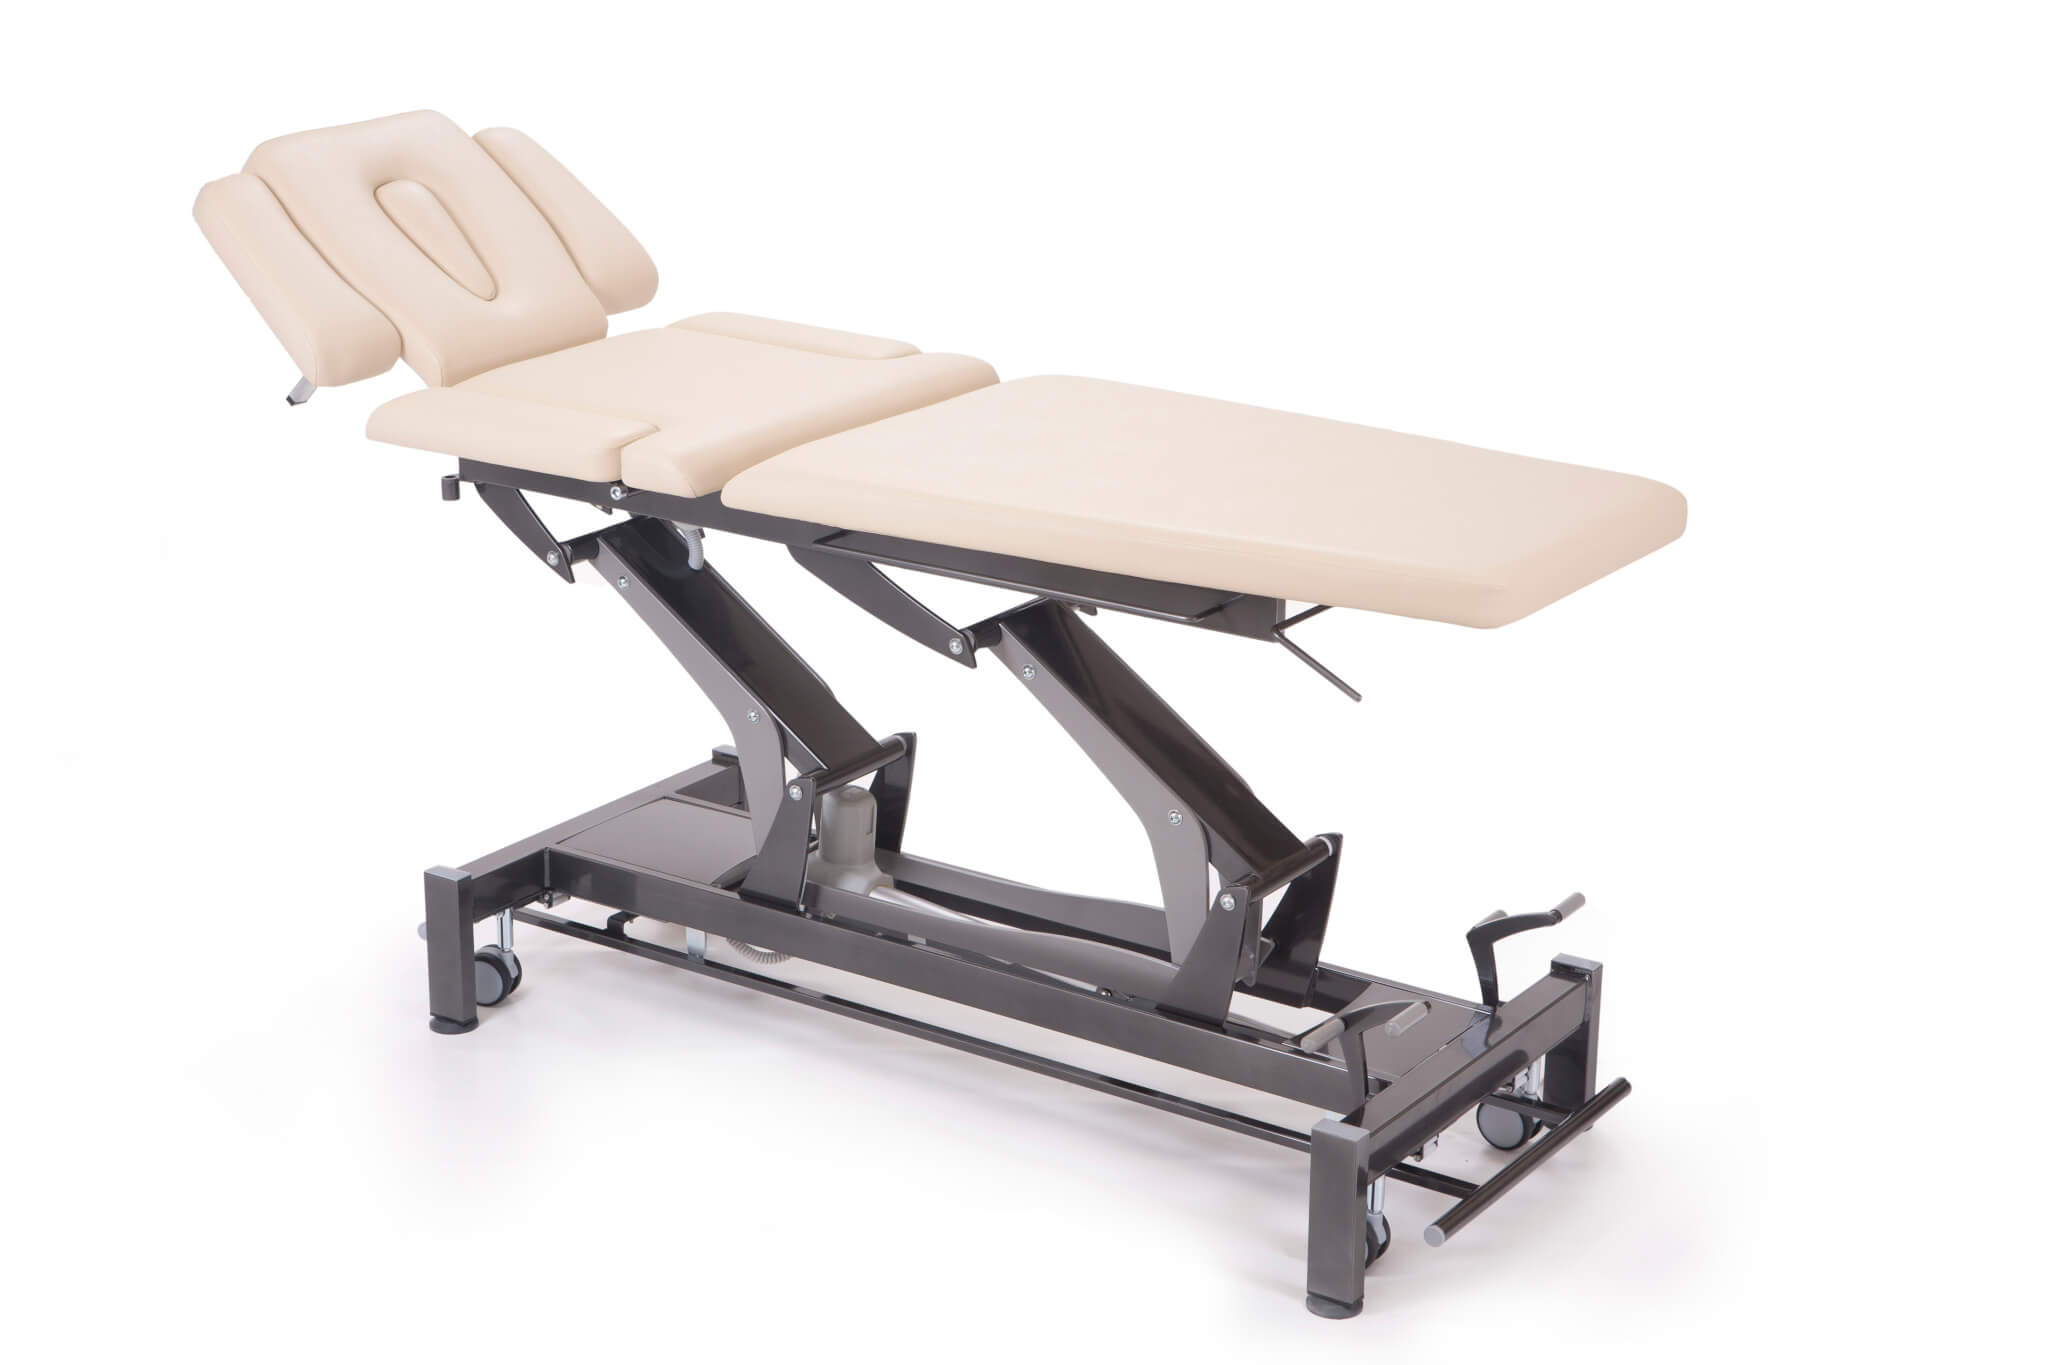 4 Signs that your Clinic Needs a Treatment Table Upgrade